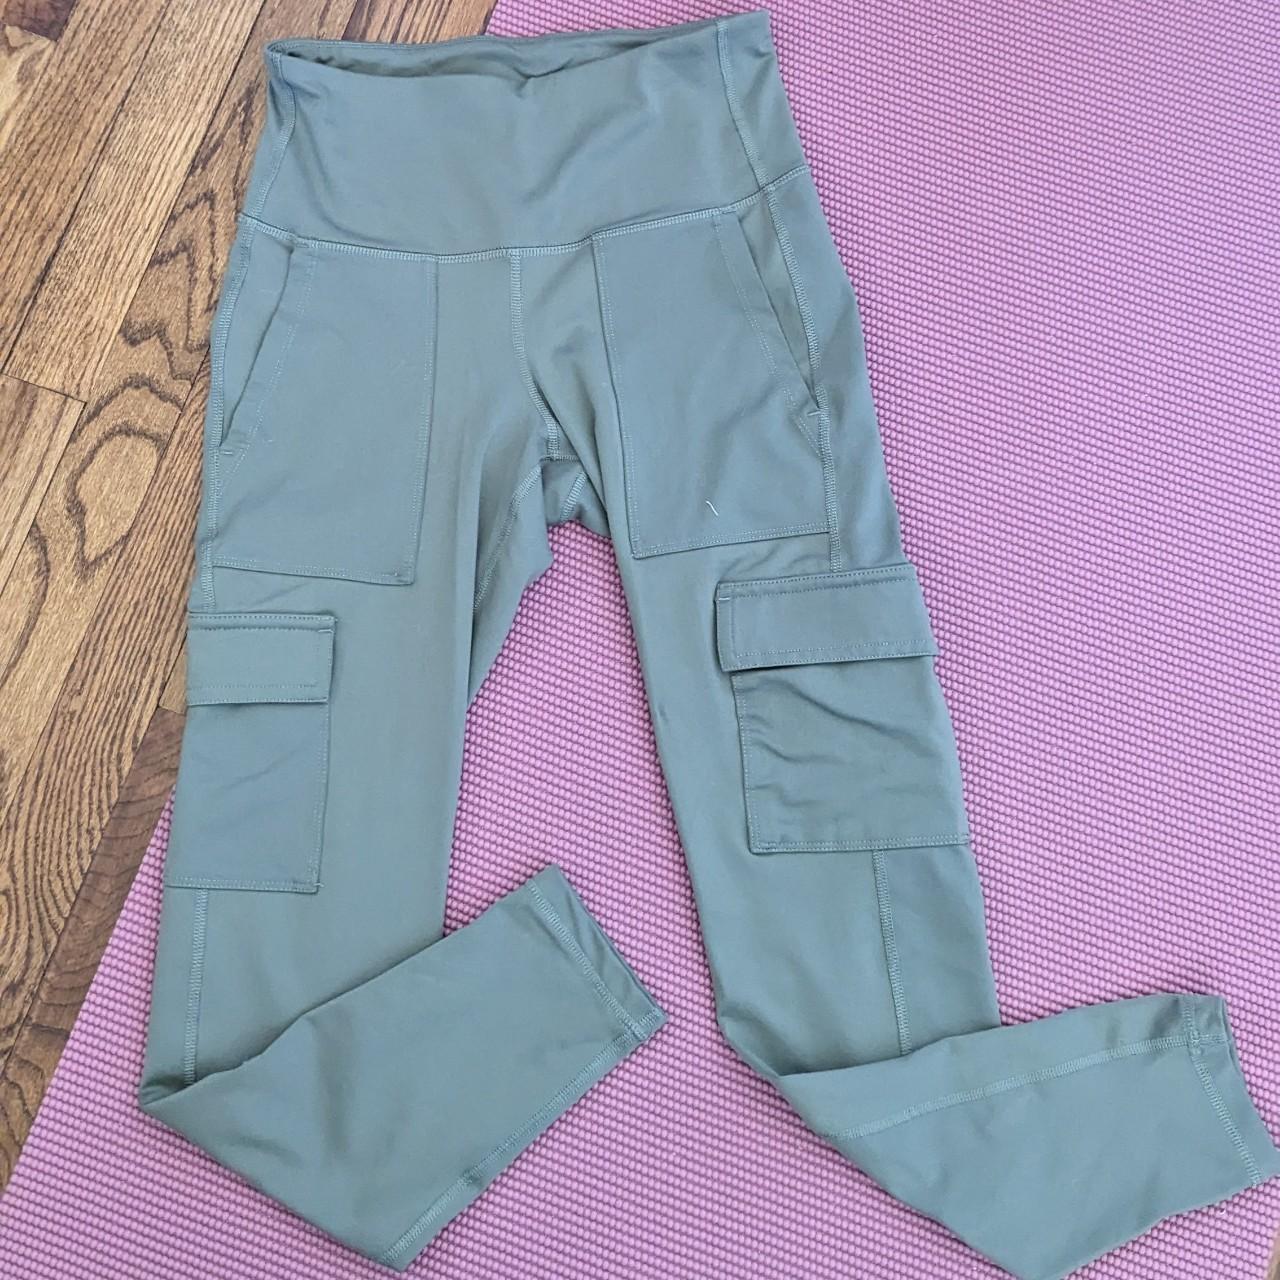 Old navy active cargo leggings, so cute and comfy!!